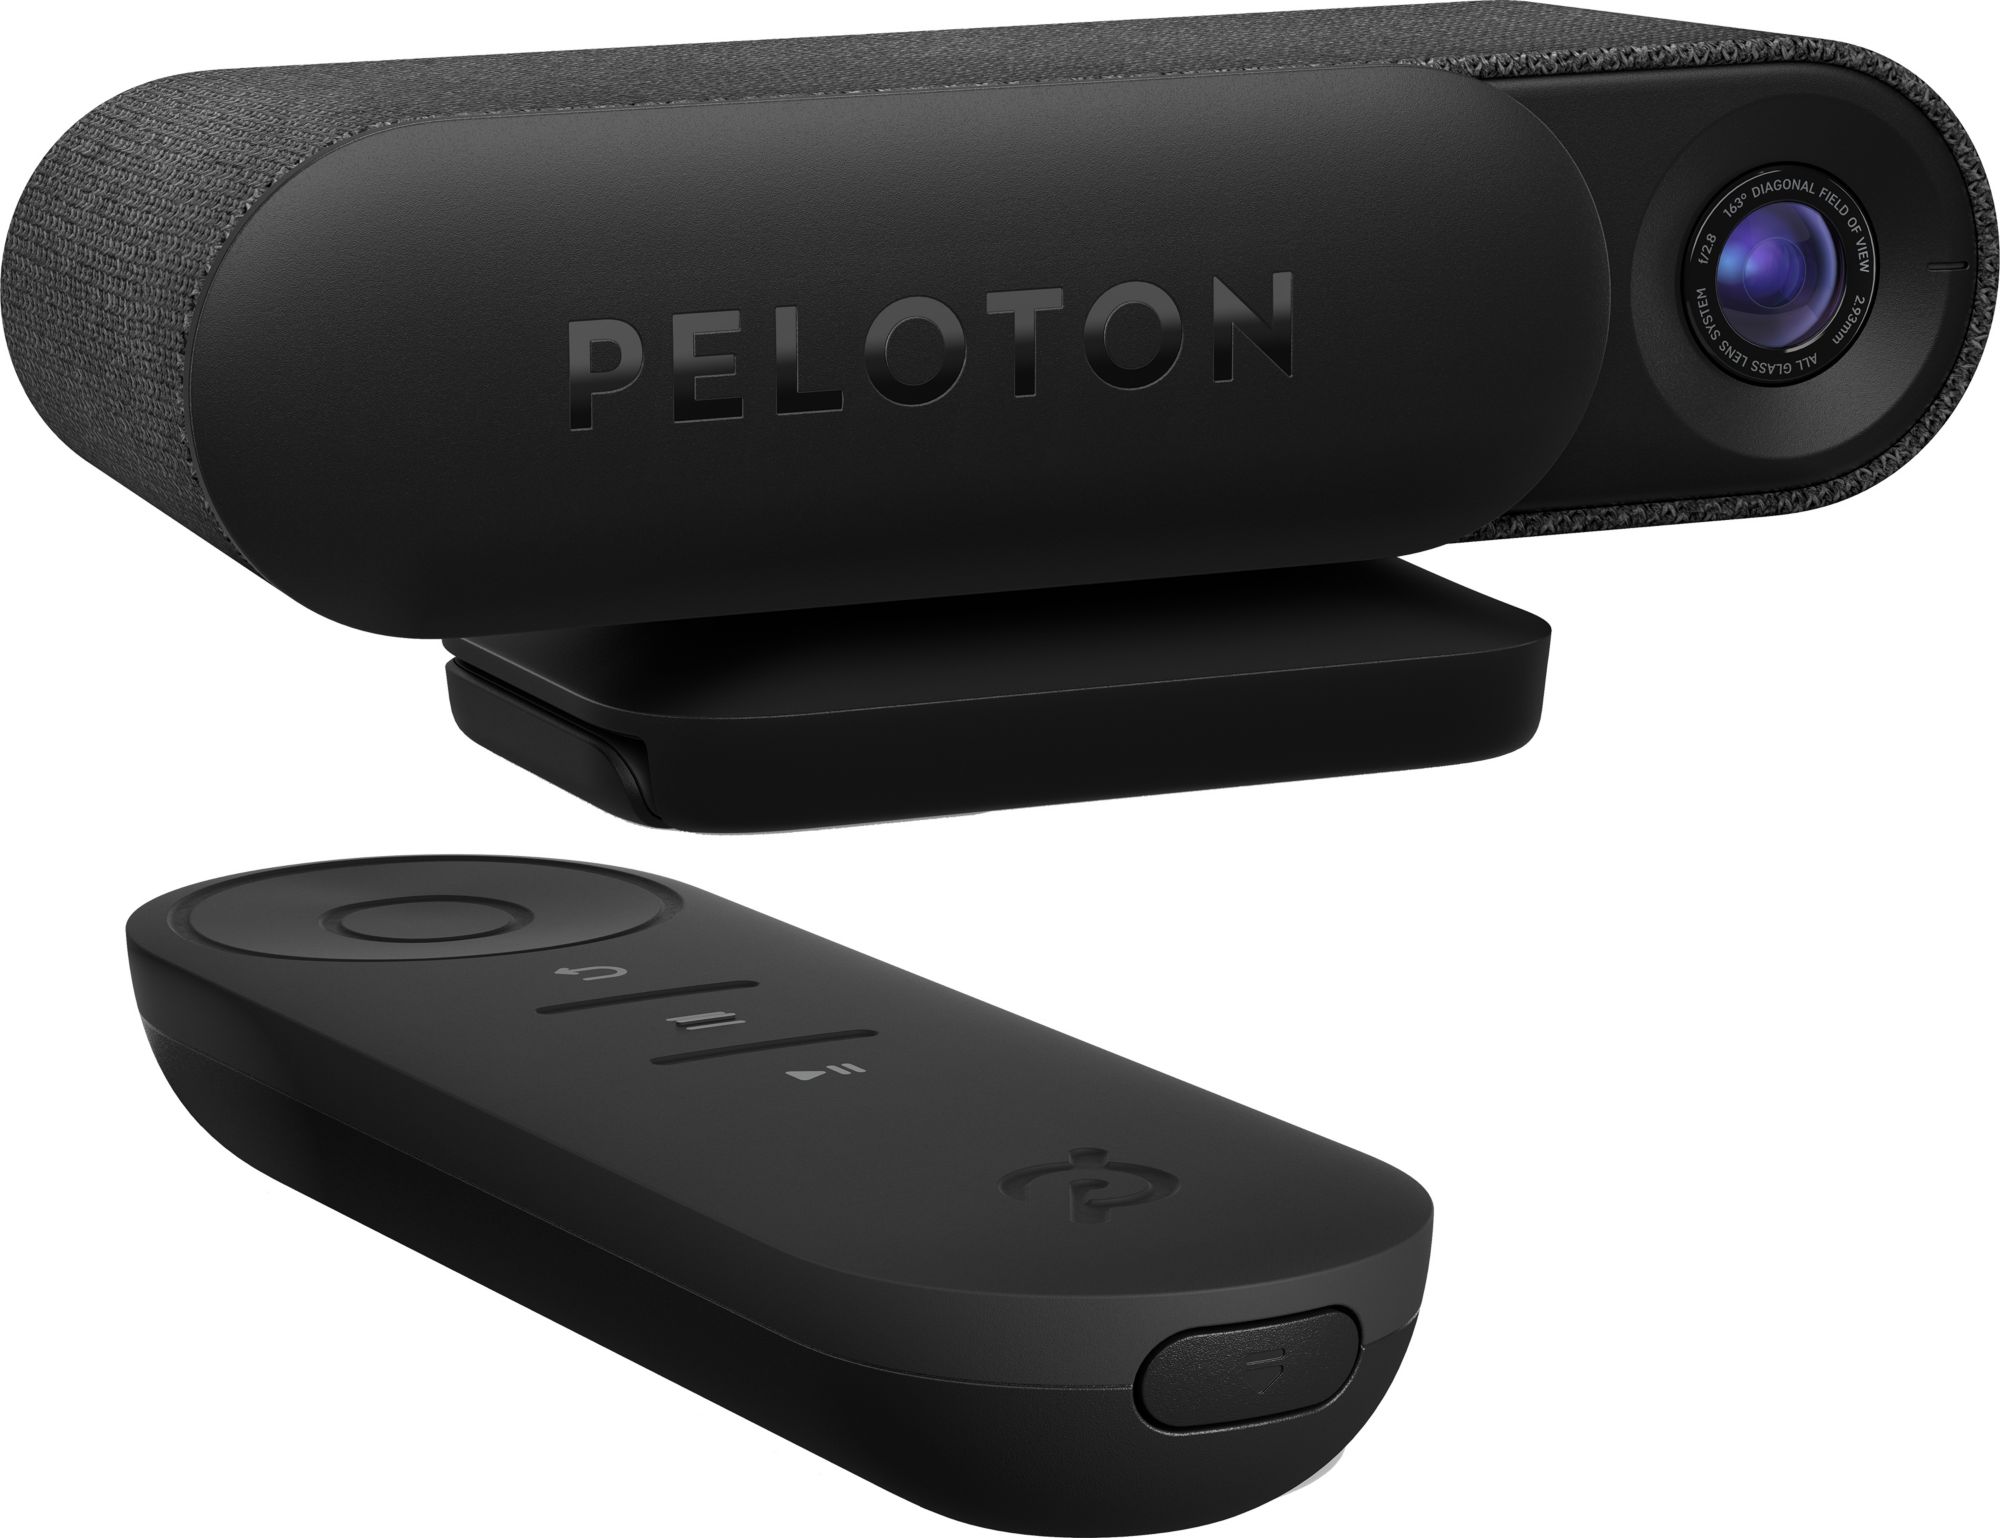 Peloton Guide Strength Training Device w/ Built-In Camera Technology, Rep Tracking, & Handheld Remote w/ Voice Control $95 + Free Shipping